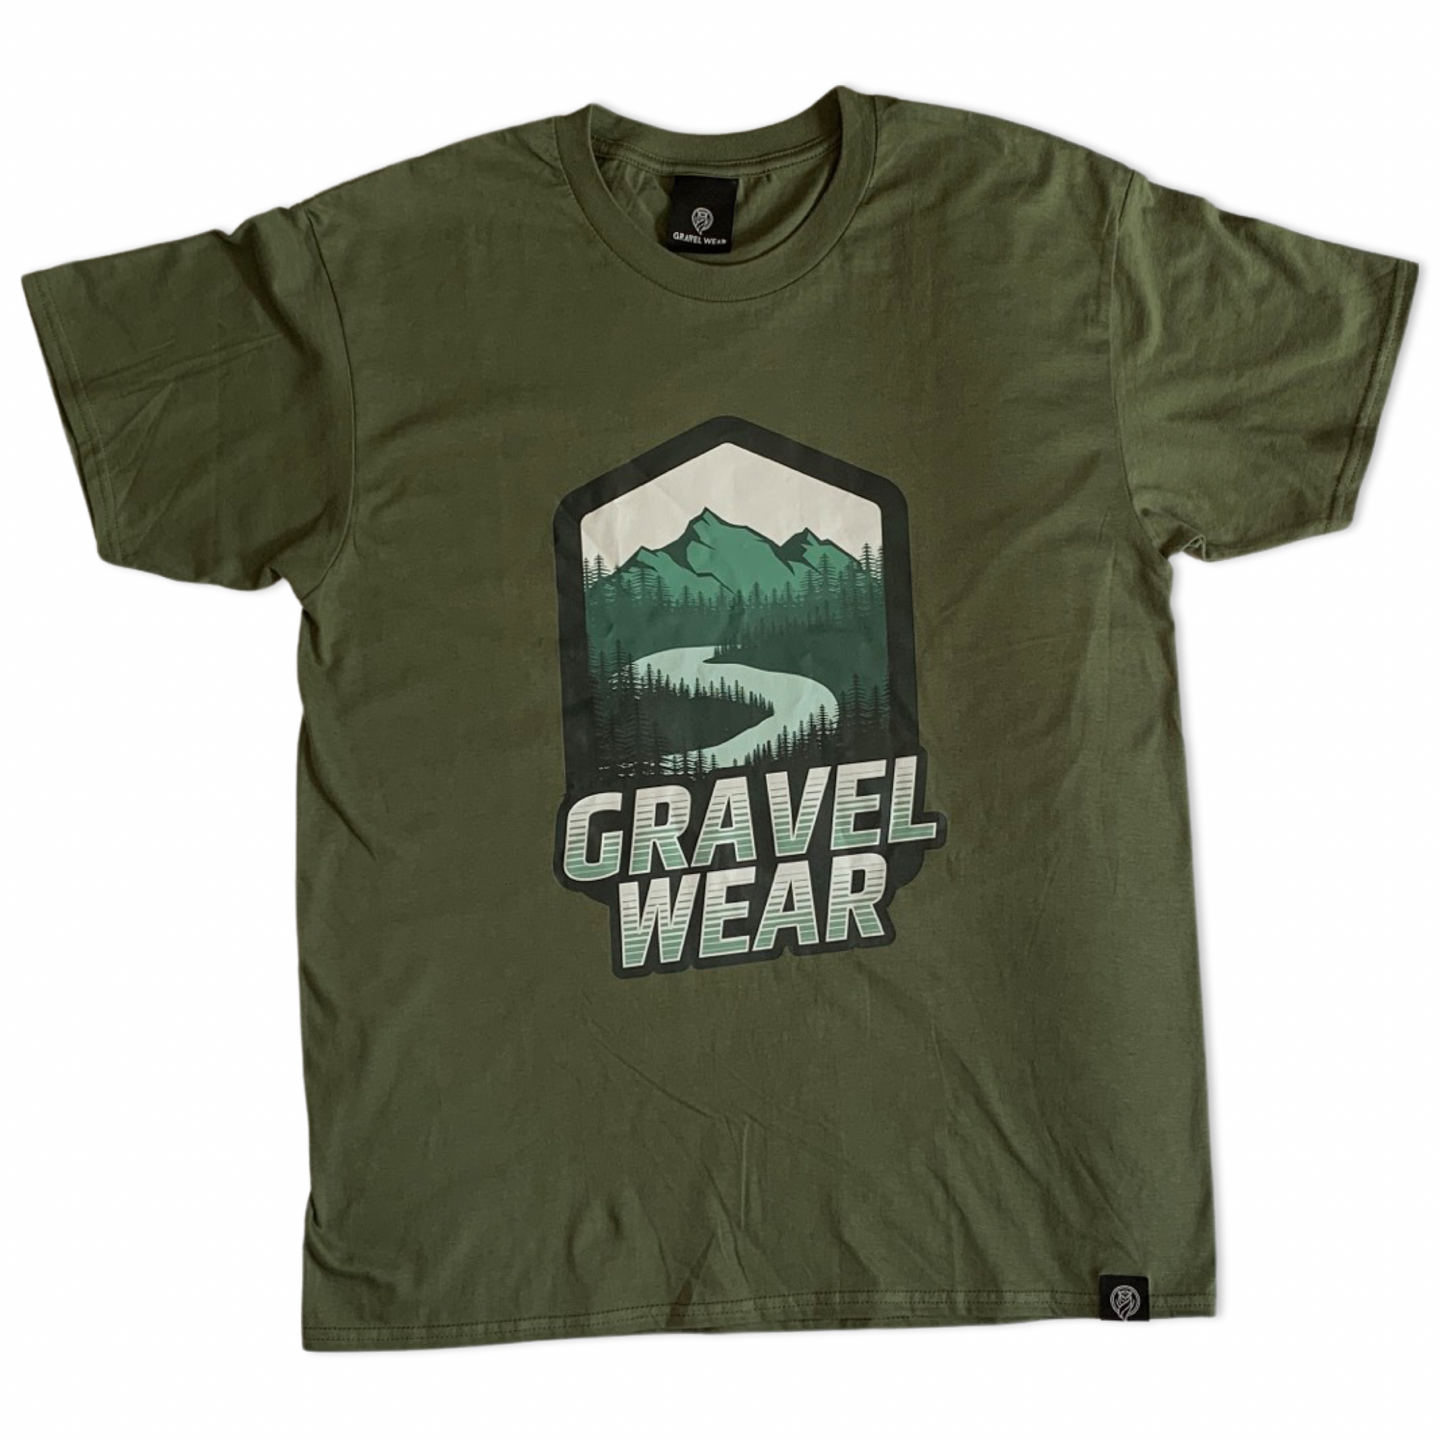 Gravel Ride Graphic T Shirt - Pine Creek front Mountain and Creek design